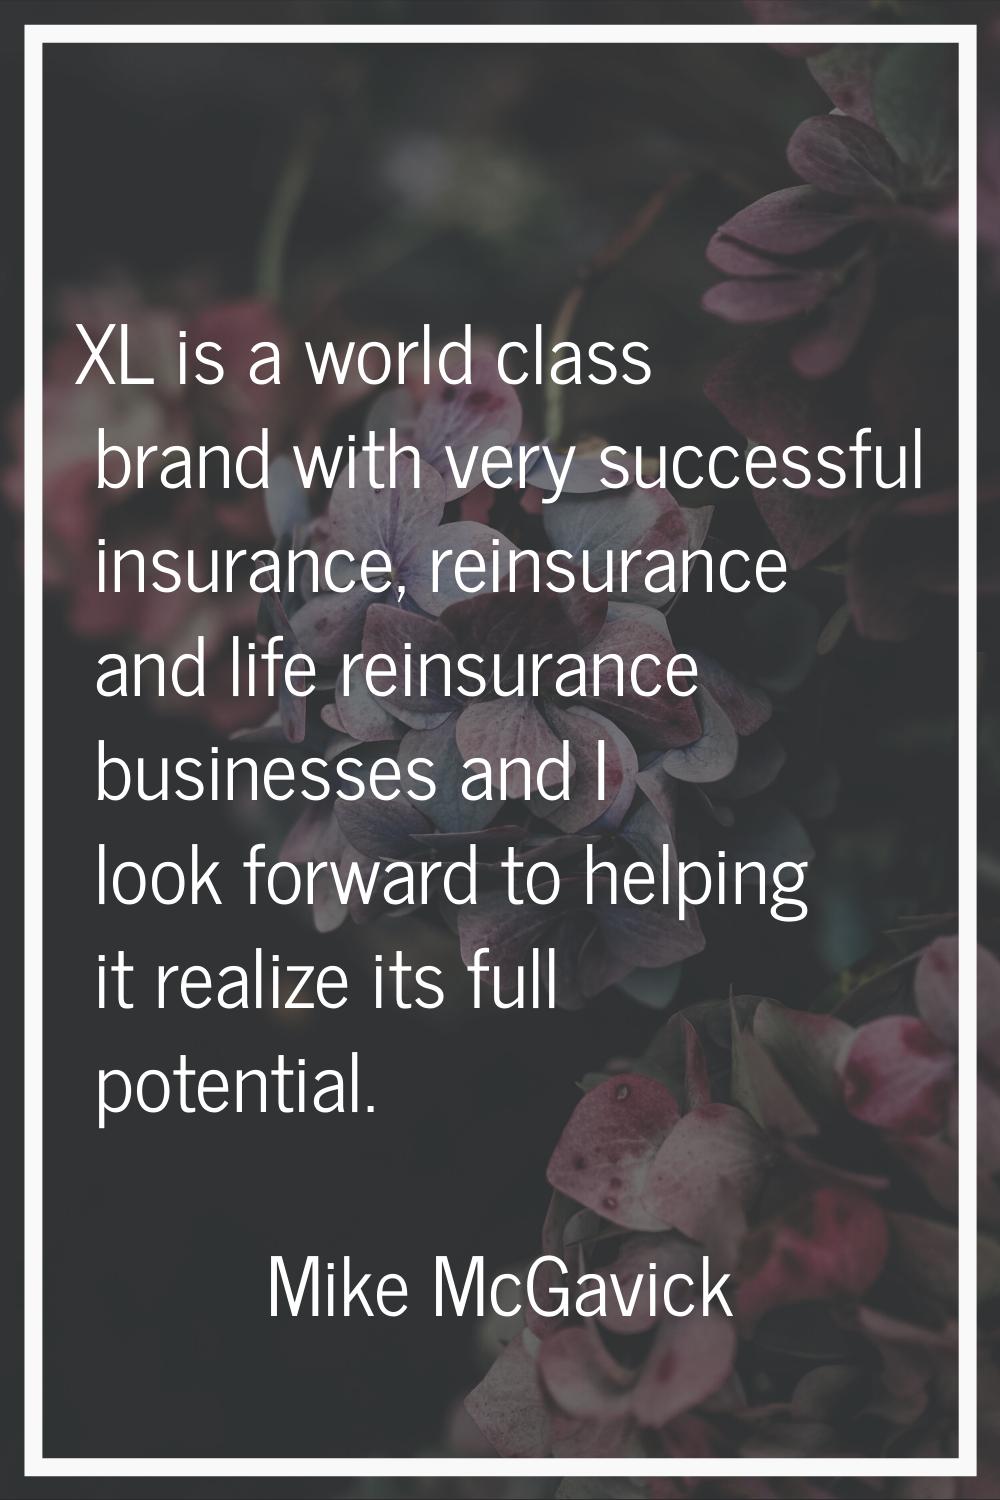 XL is a world class brand with very successful insurance, reinsurance and life reinsurance business